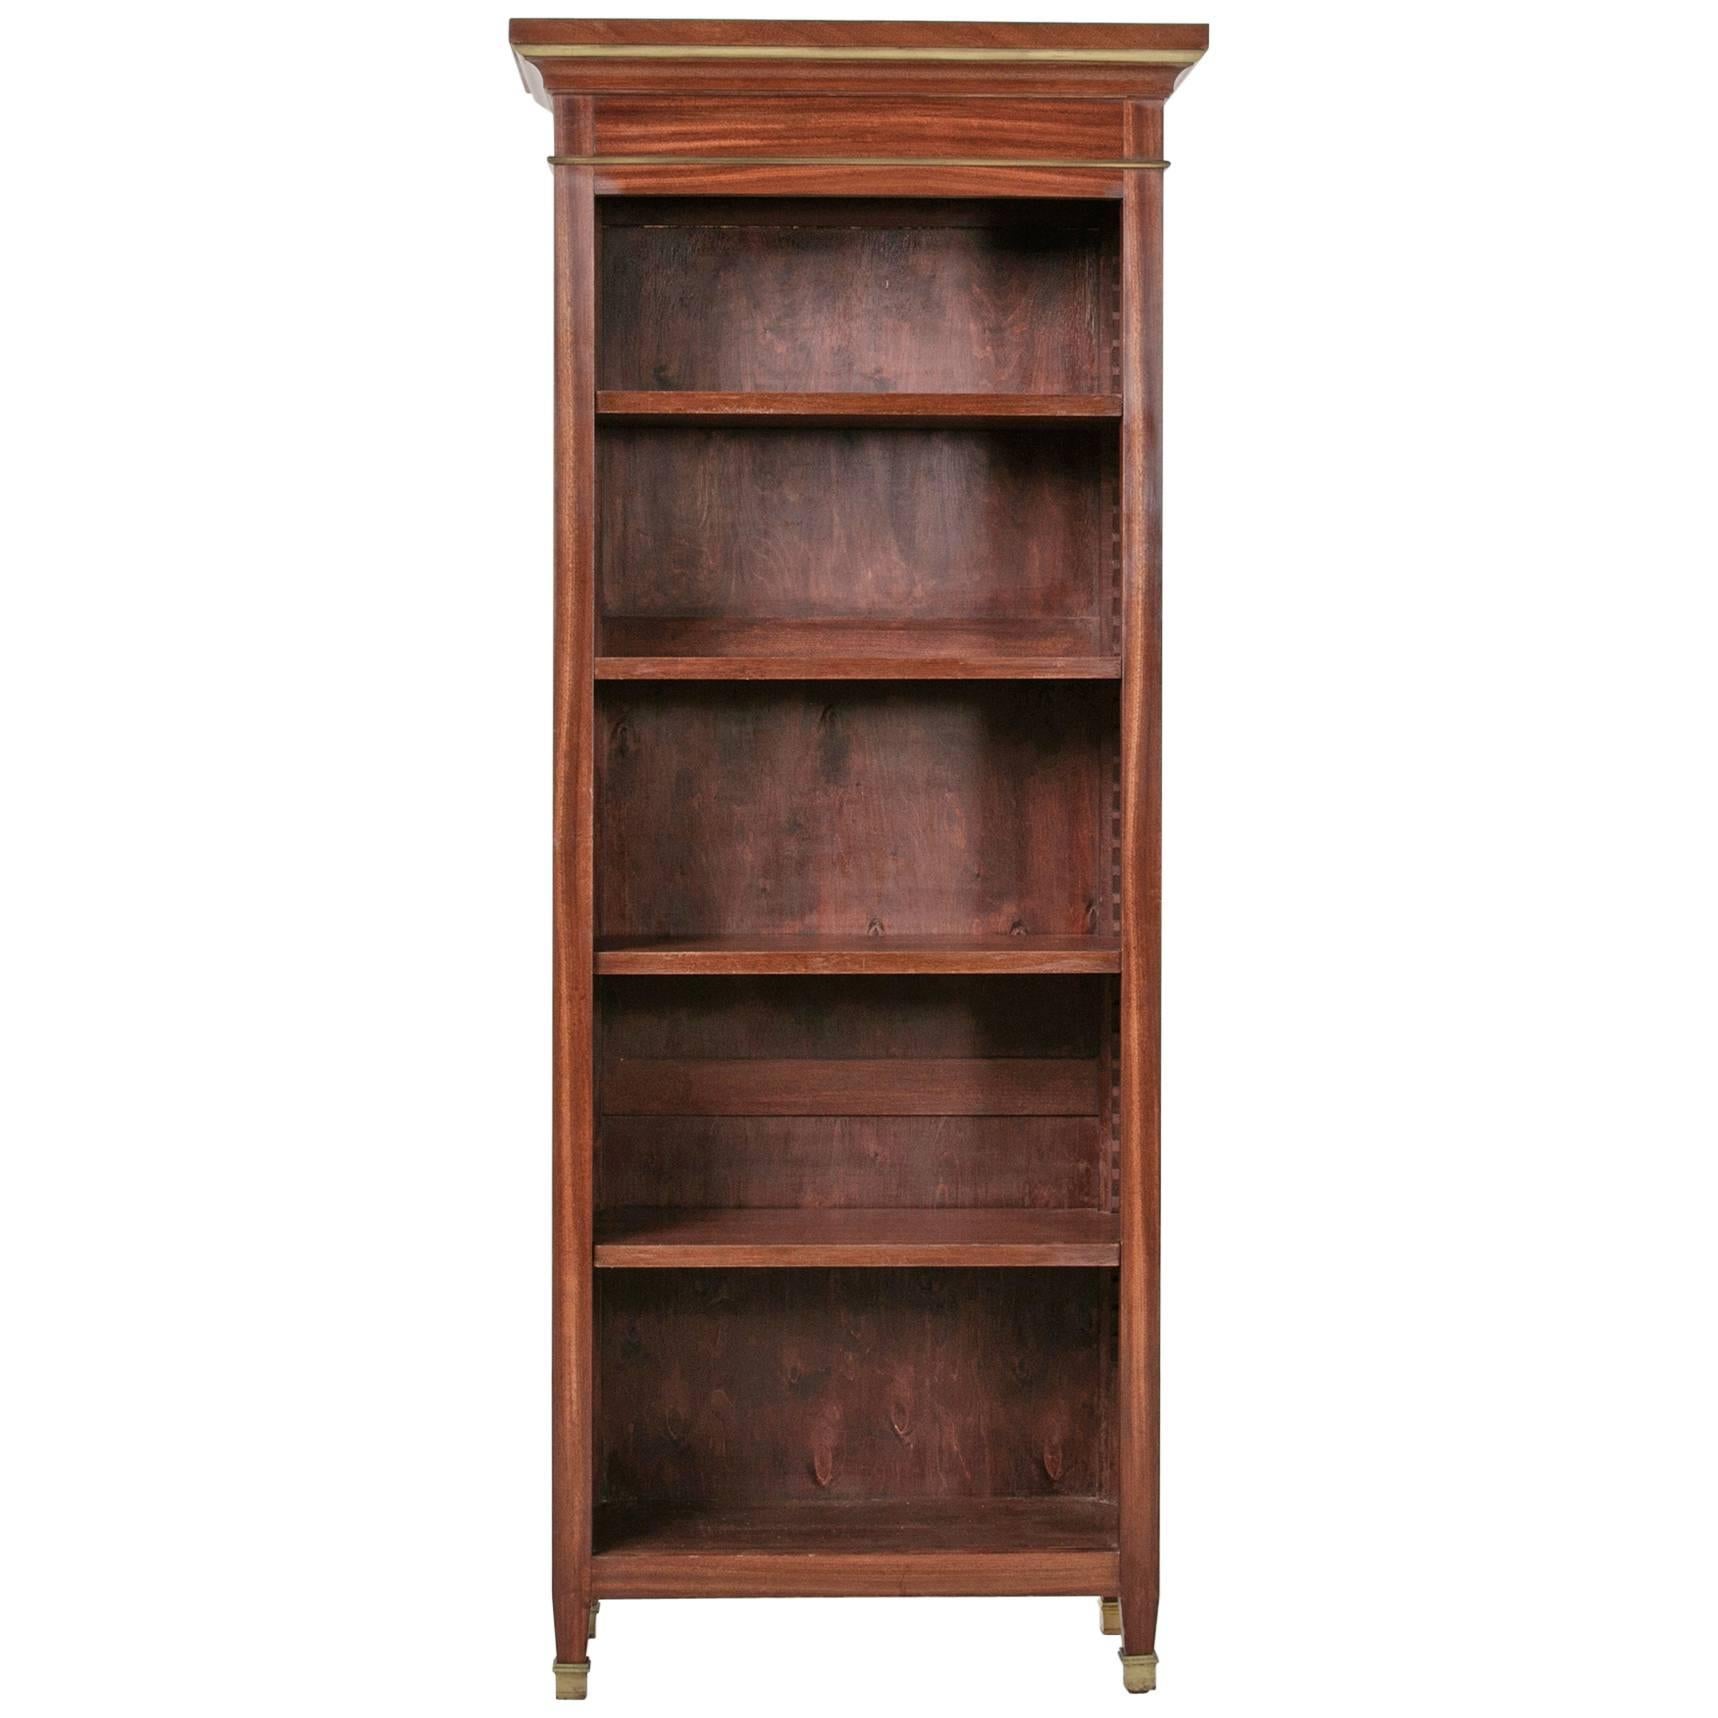 These mid-20th century Louis XVI style mahogany bookcases are finely detailed with bronze banding surrounding their recessed paneled sides and cornice. Their tapered legs are finished in bronze sabots. Four interior shelves, adjustable by means of